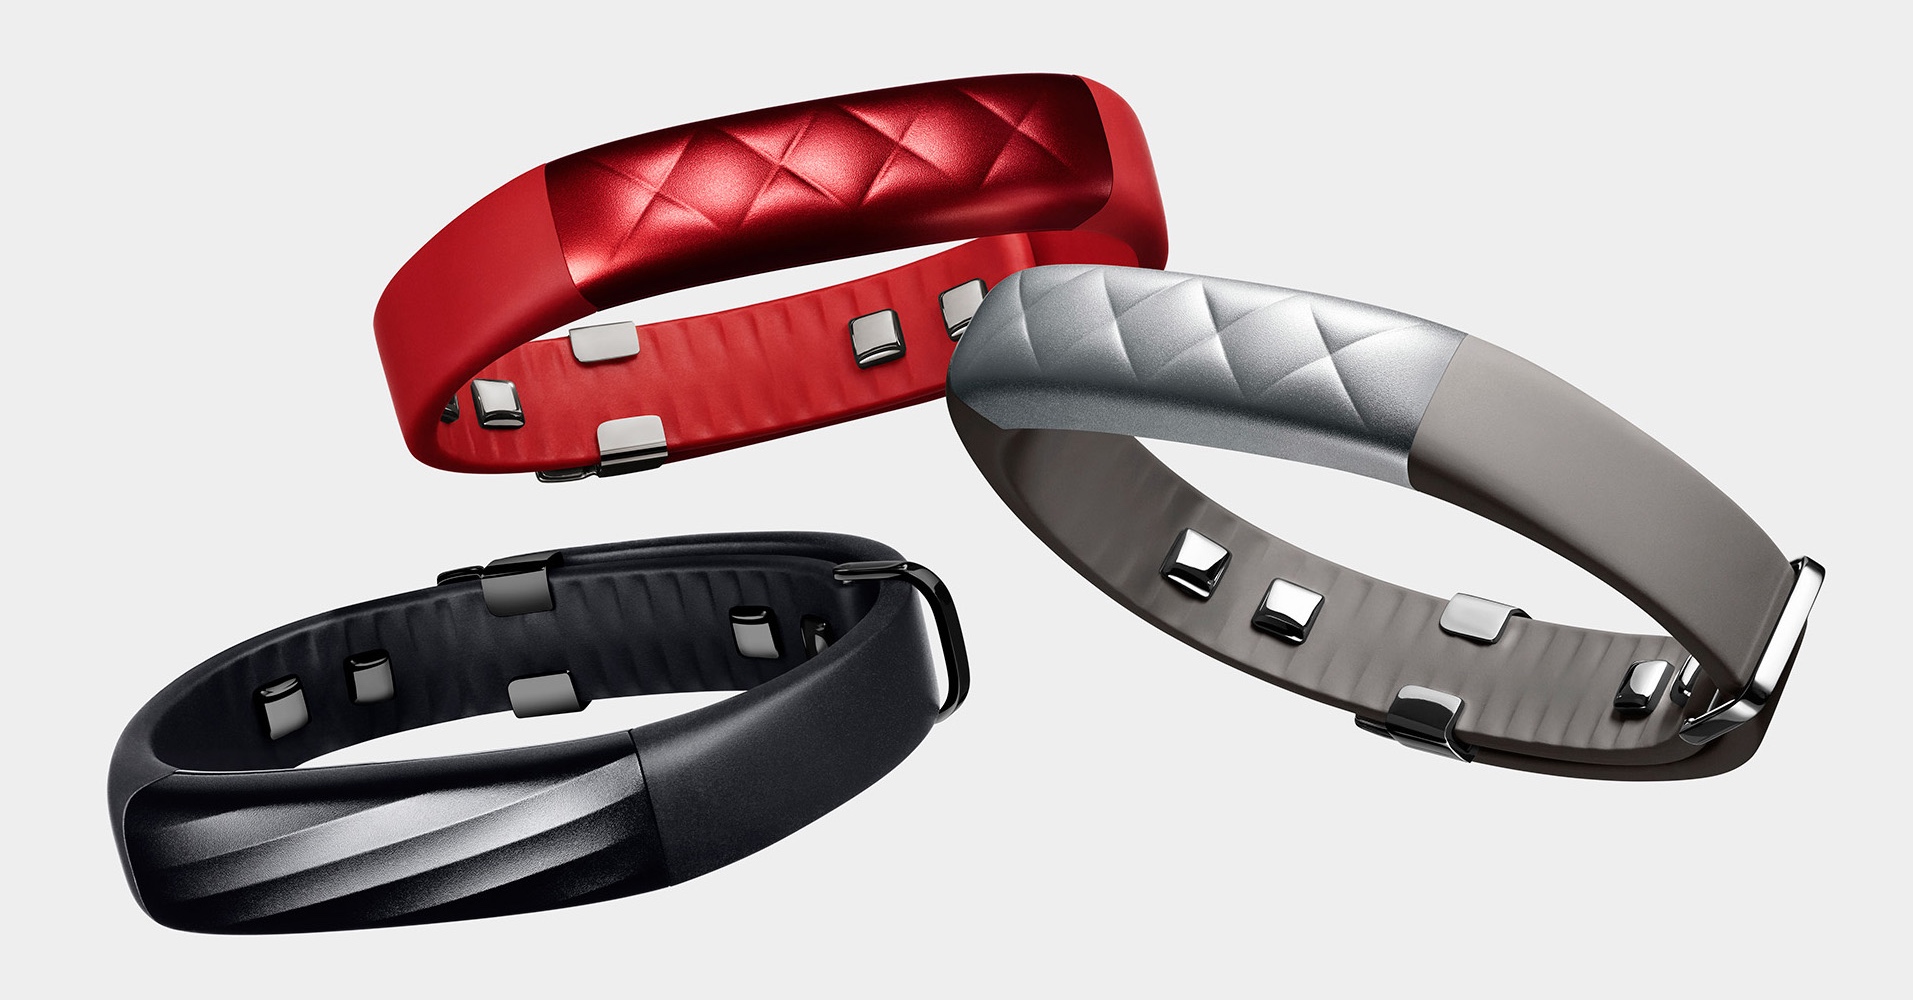 Fitbit Attempted to Acquire Struggling Rival Jawbone, But a Lowball Offer Ended Talks